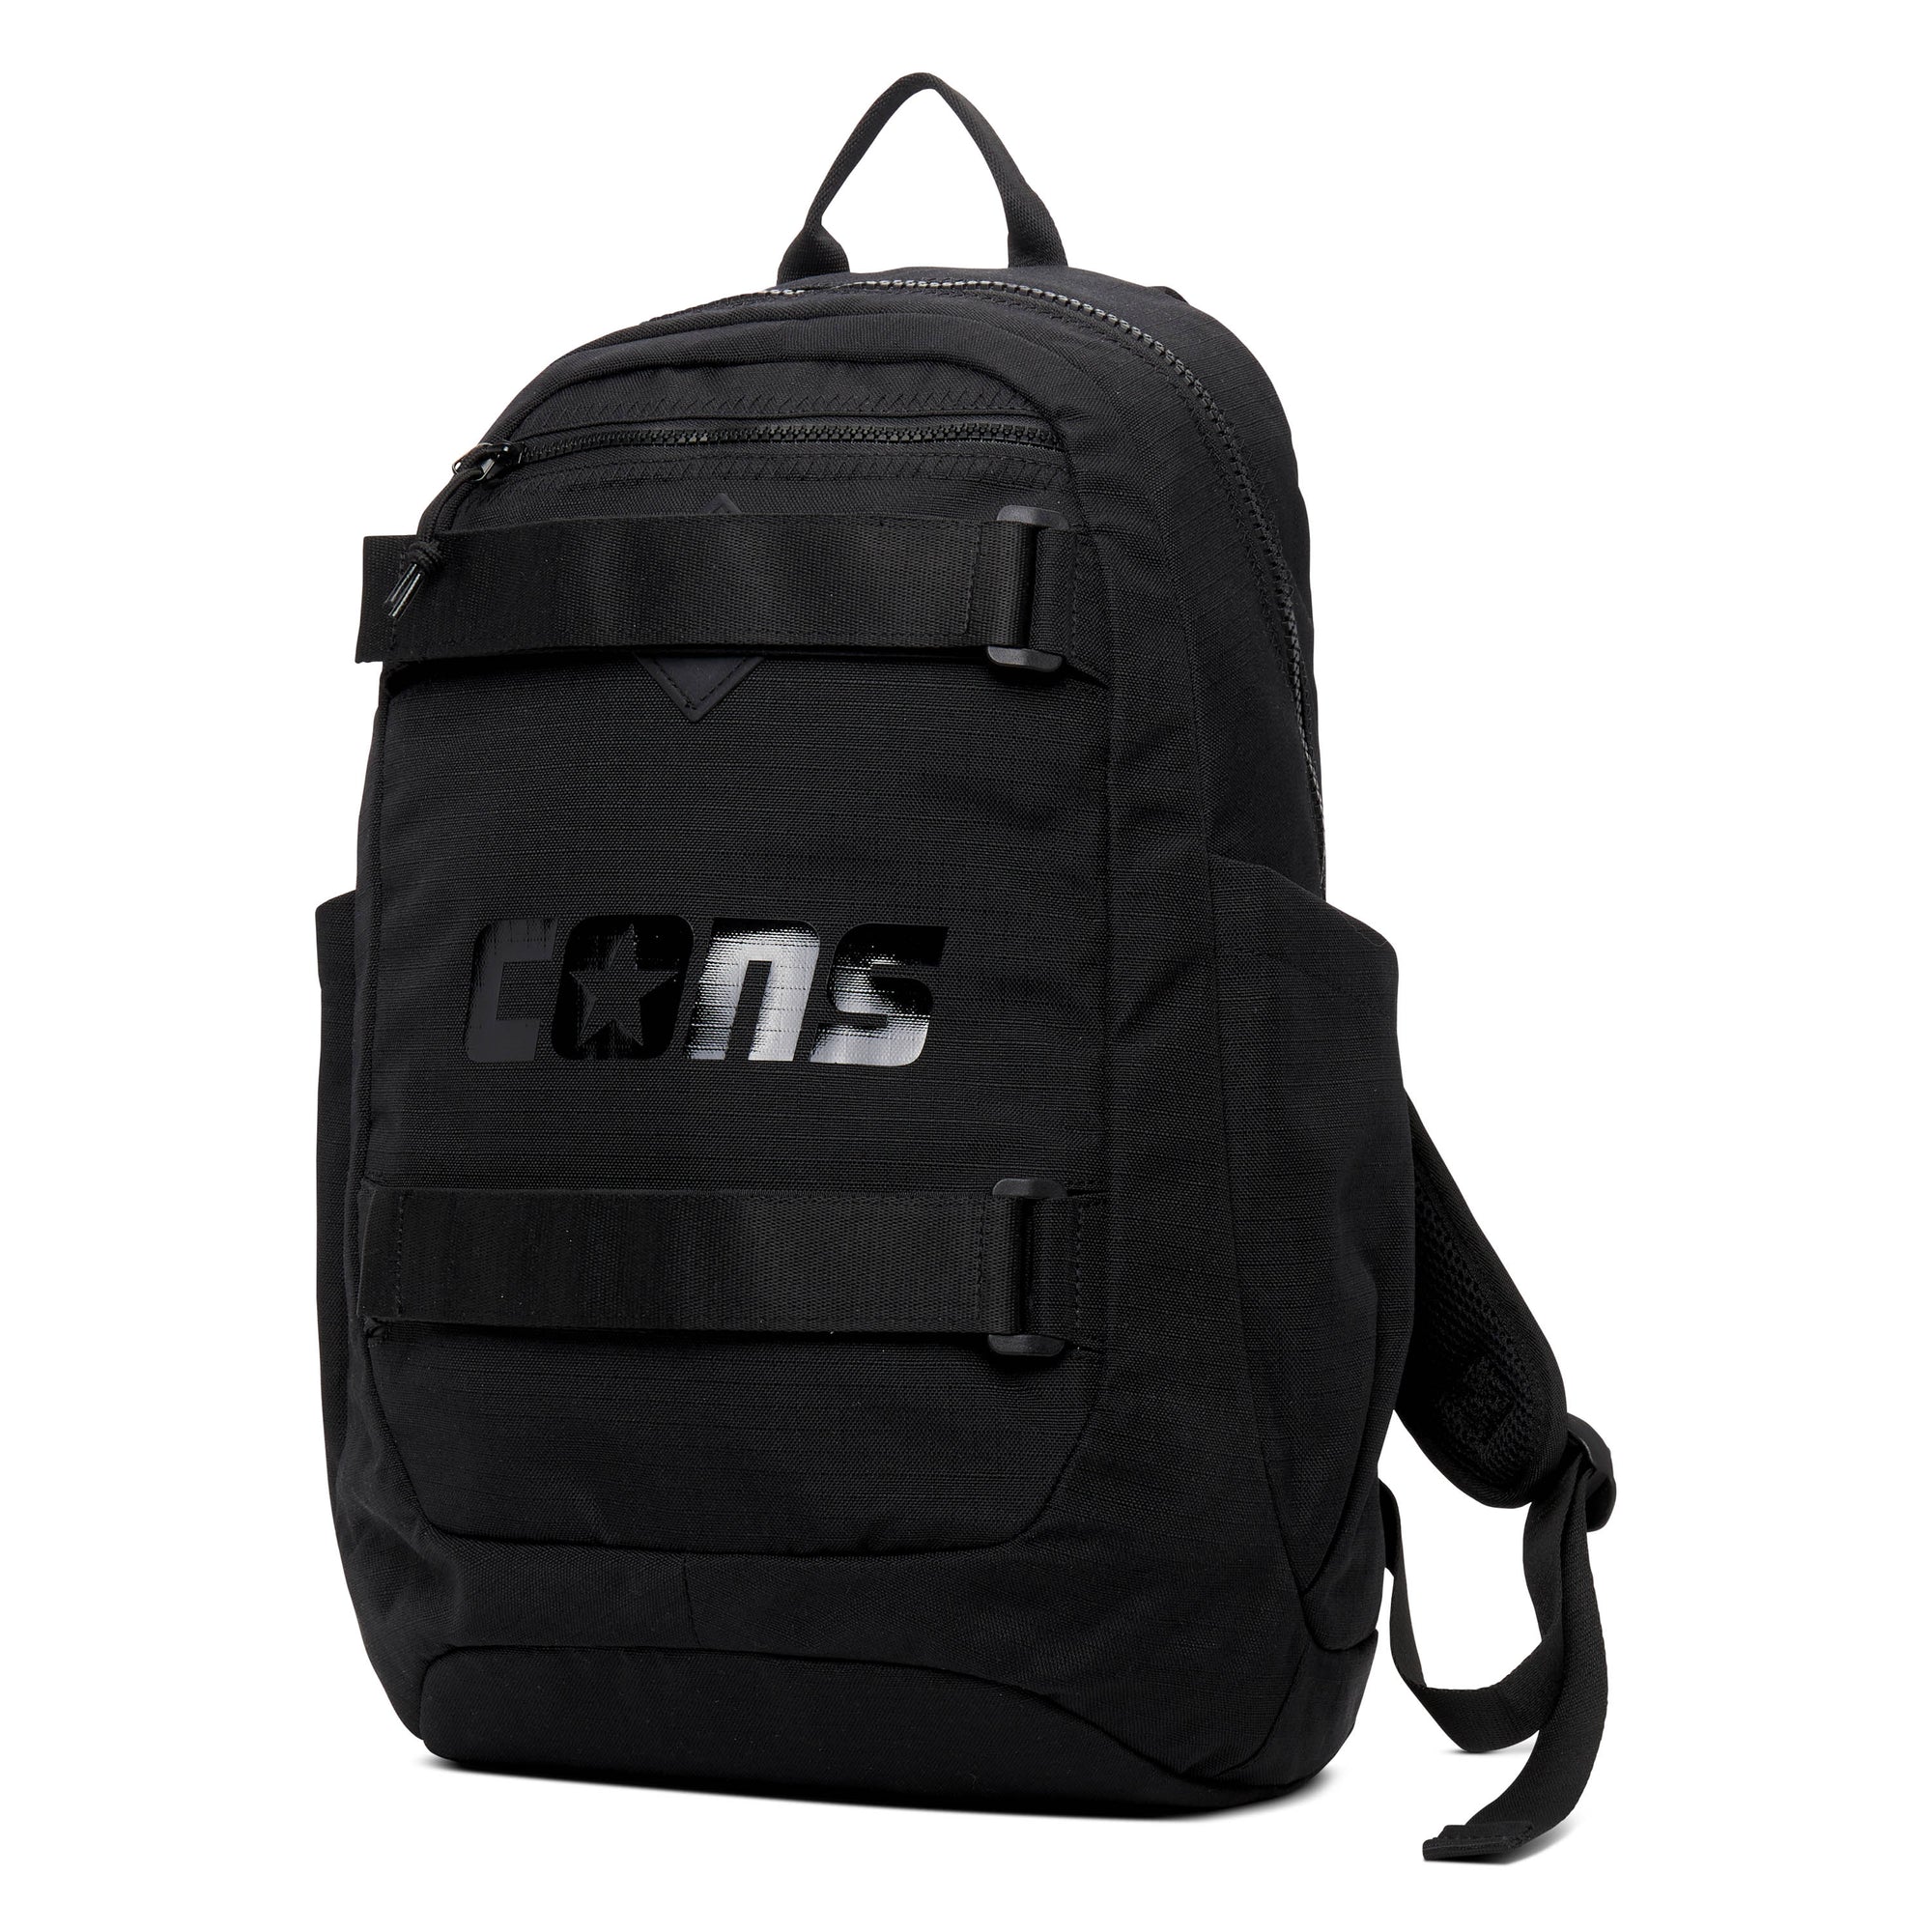 Converse Cons Utility Backpack Converse Black